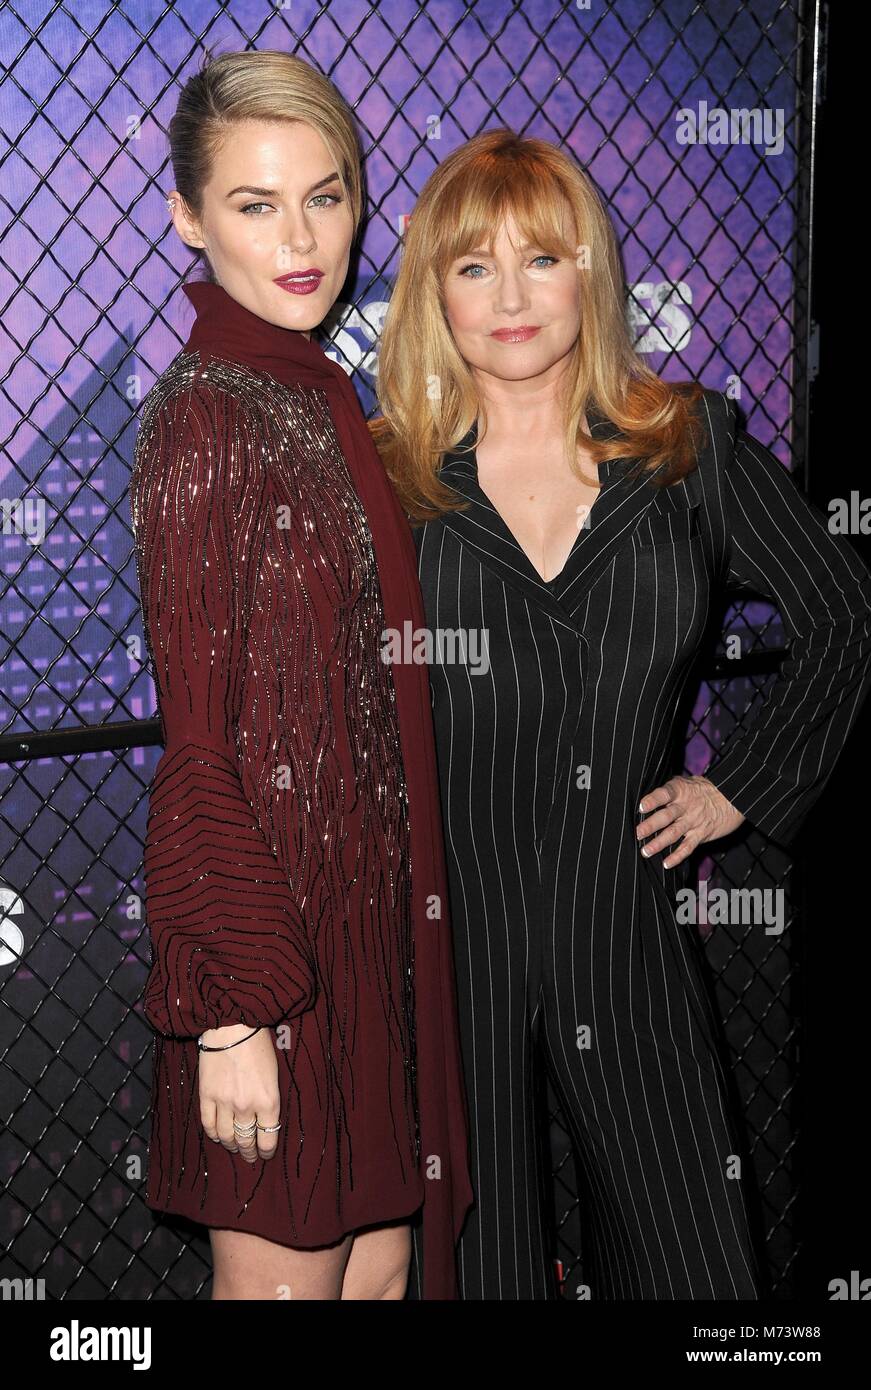 Rachael Taylor, Rebecca De Mornay at arrivals for MARVEL’S JESSICA JONES Season 2 Premiere, AMC Loews Lincoln Square, New York, NY March 7, 2018. Photo By: Kristin Callahan/Everett Collection Stock Photo